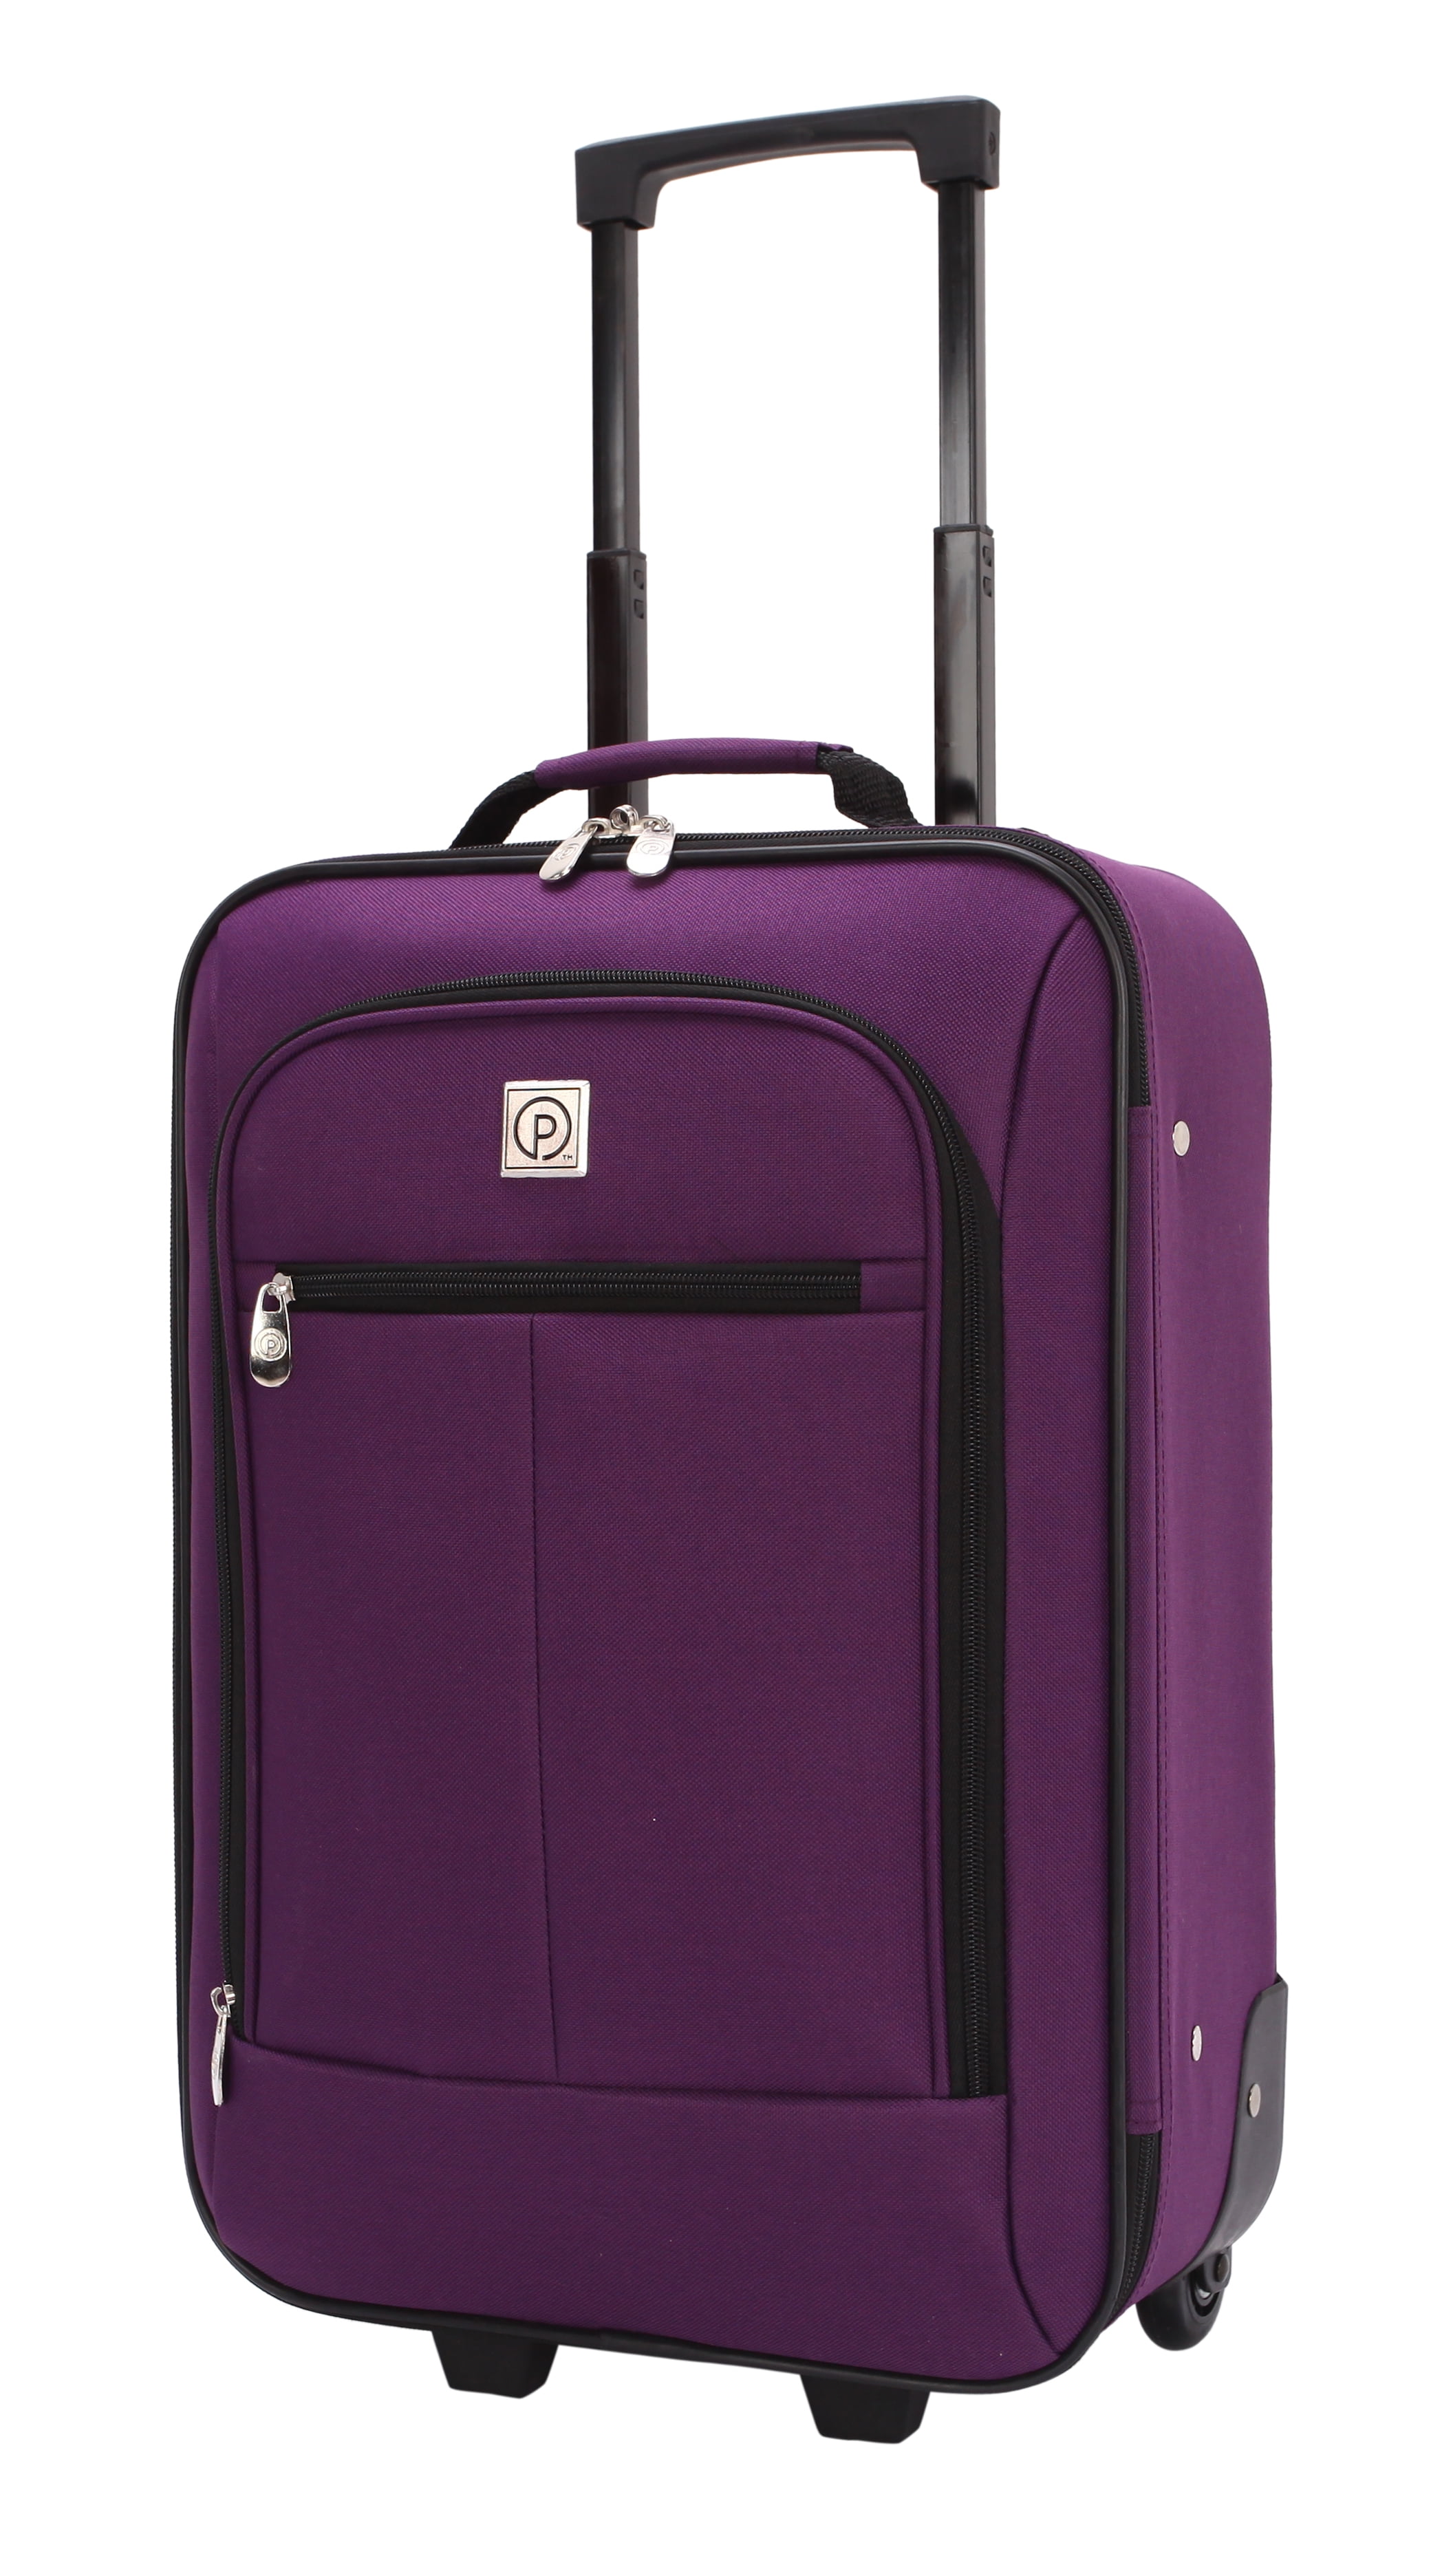 Universal protective cover for small suitcase 9003-55 Purple